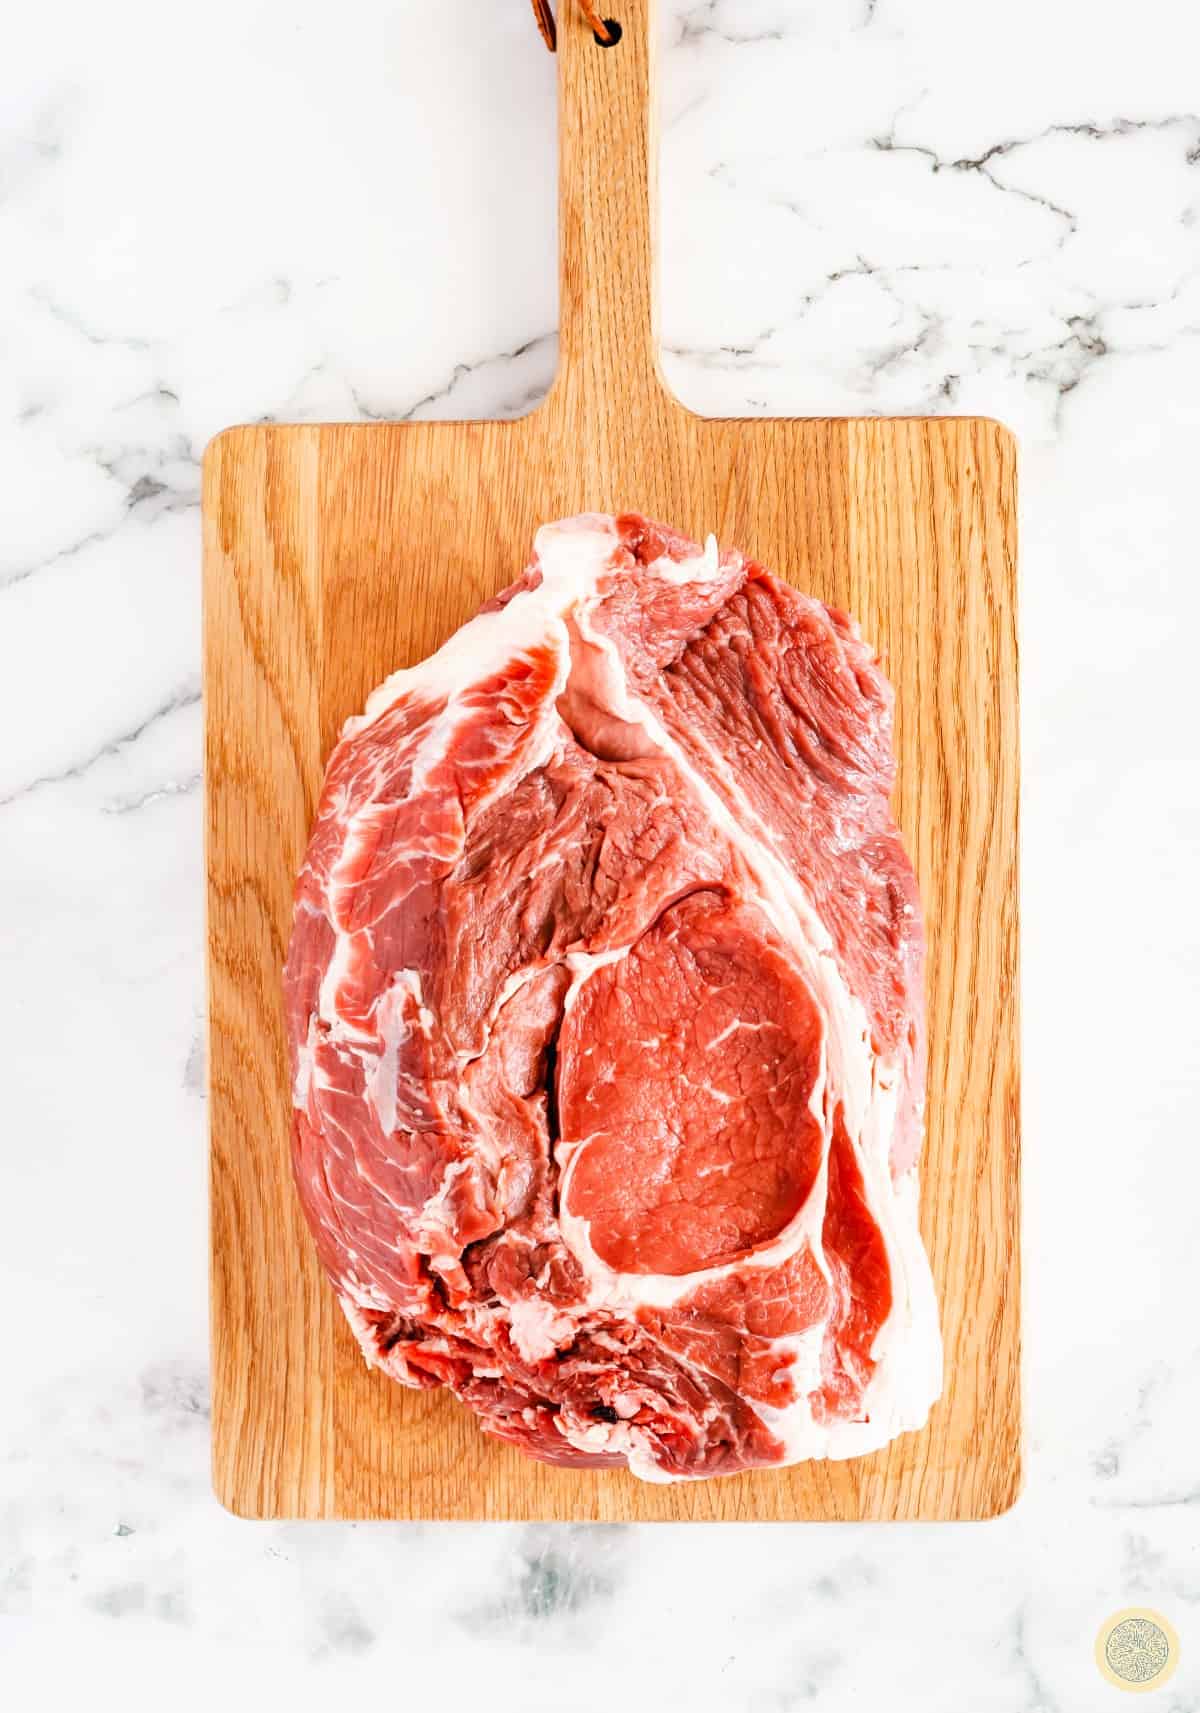 Trim off the excess fats from your beef and slice